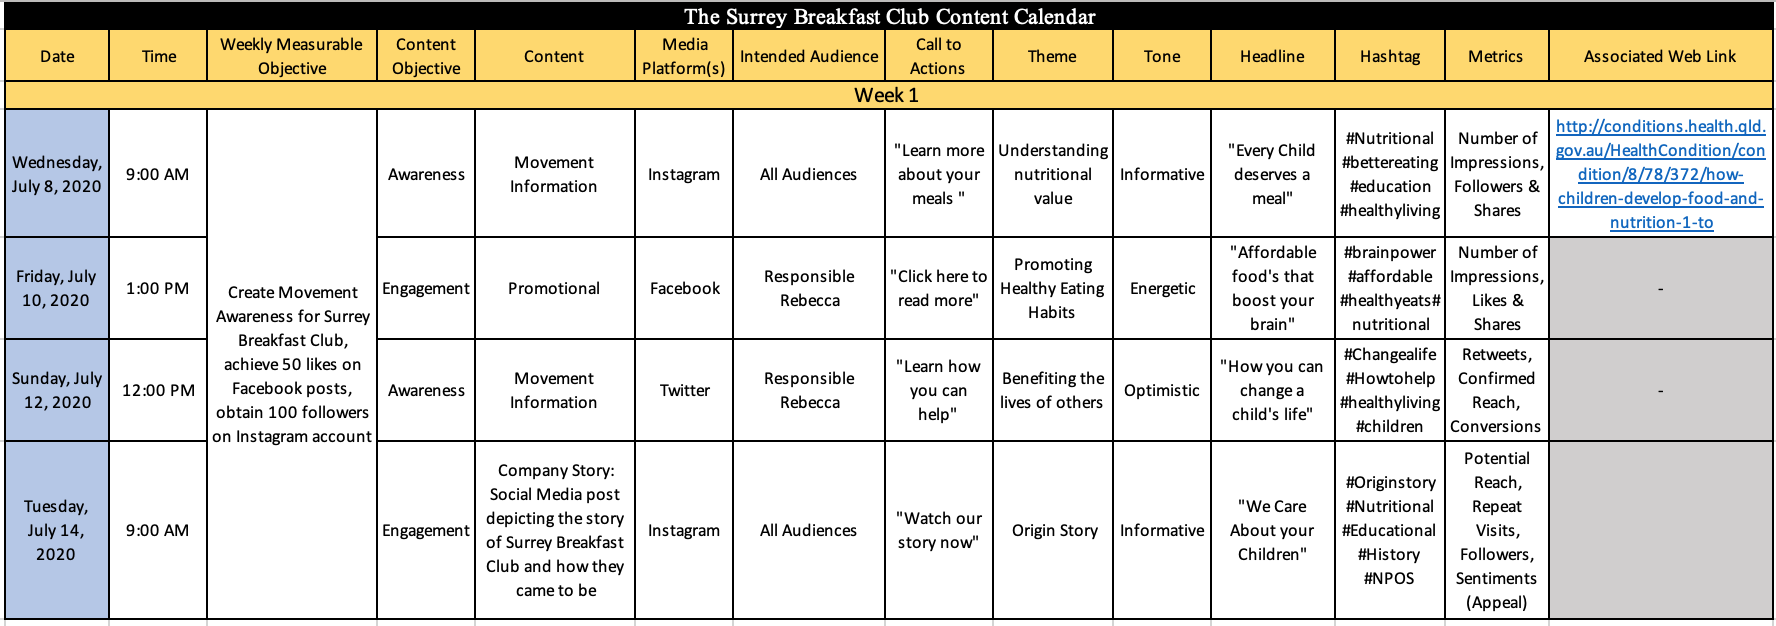 Excel grid example of a content calendar for Surrey Breakfast Club.